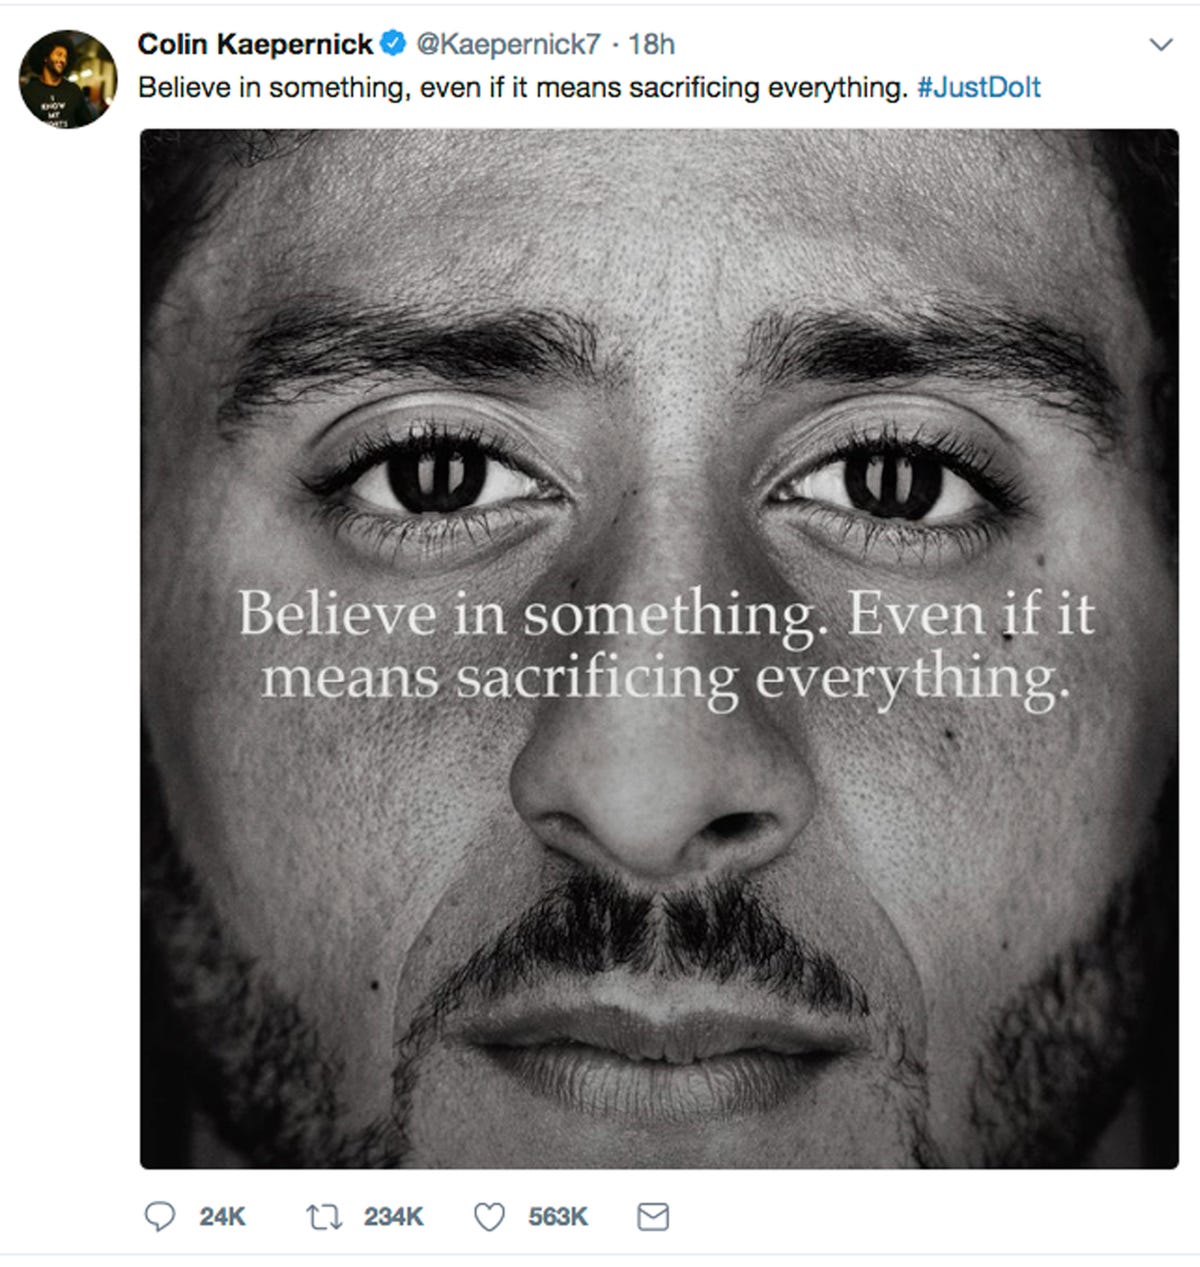 Nike's Colin is inspirational, not controversial